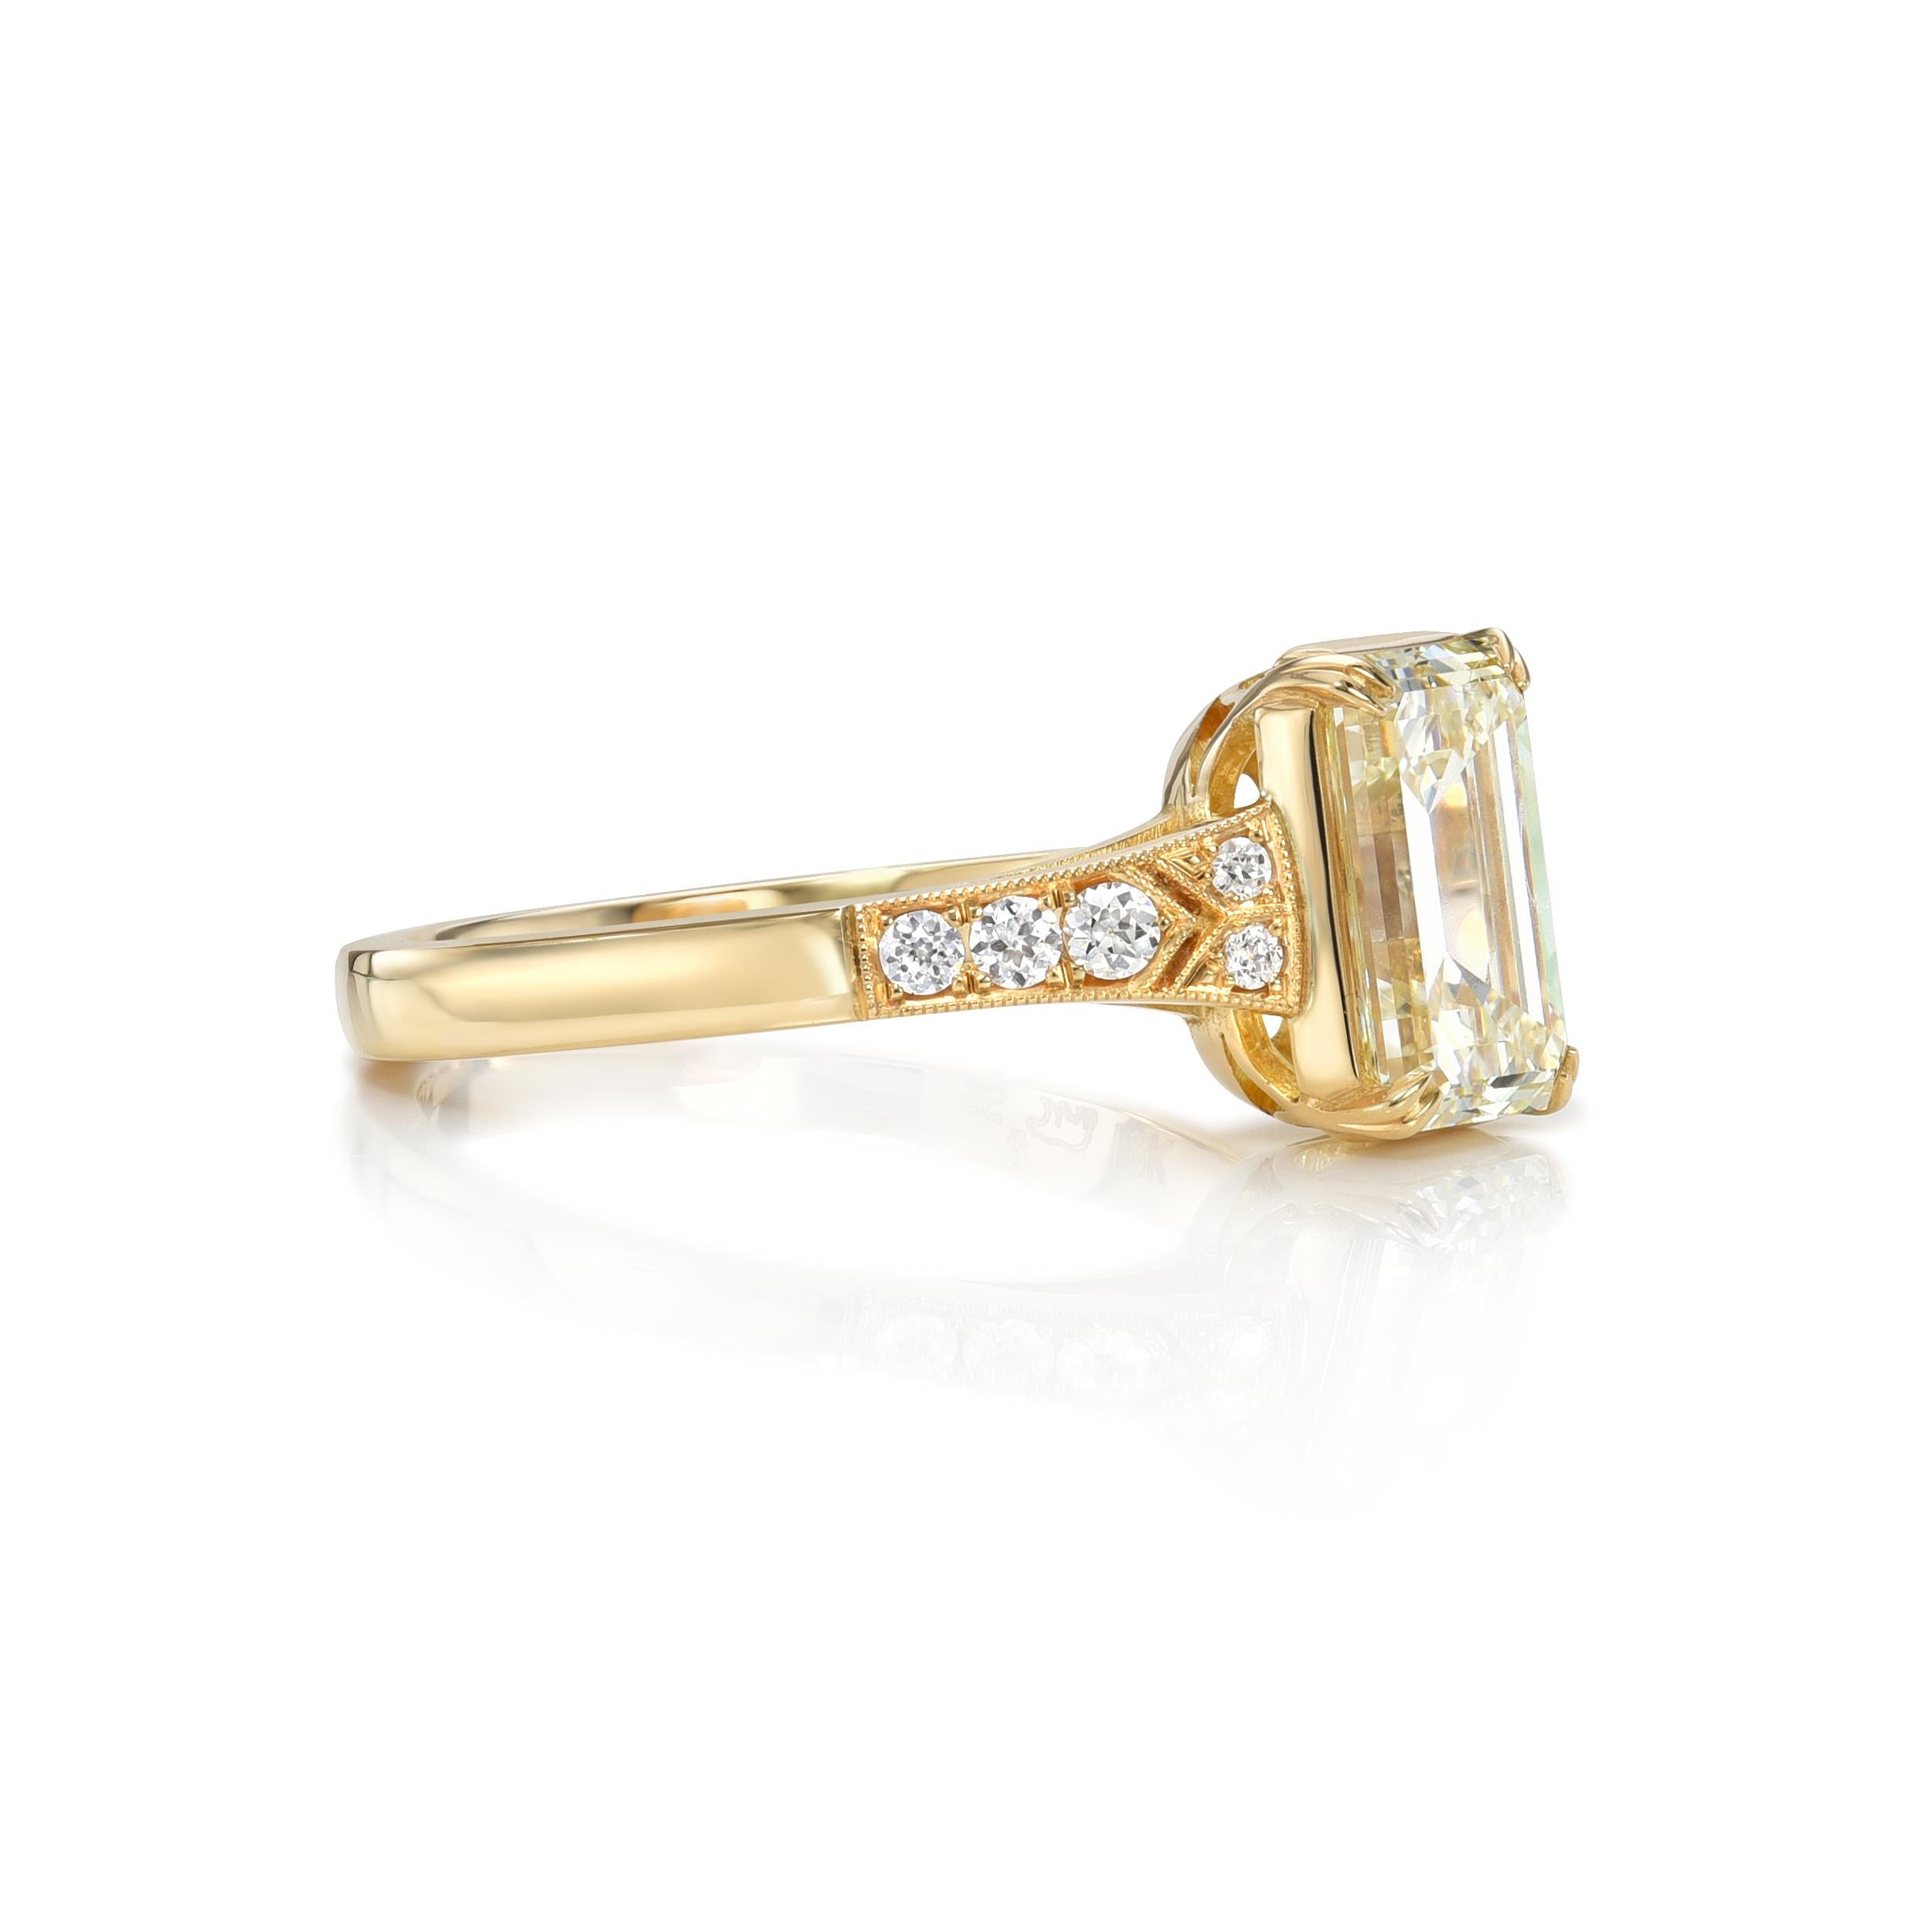 2.00ct M/VS2 GIA certified emerald cut diamond with 0.10ctw old European cut accent diamonds set in a handcrafted 18K yellow gold mounting.